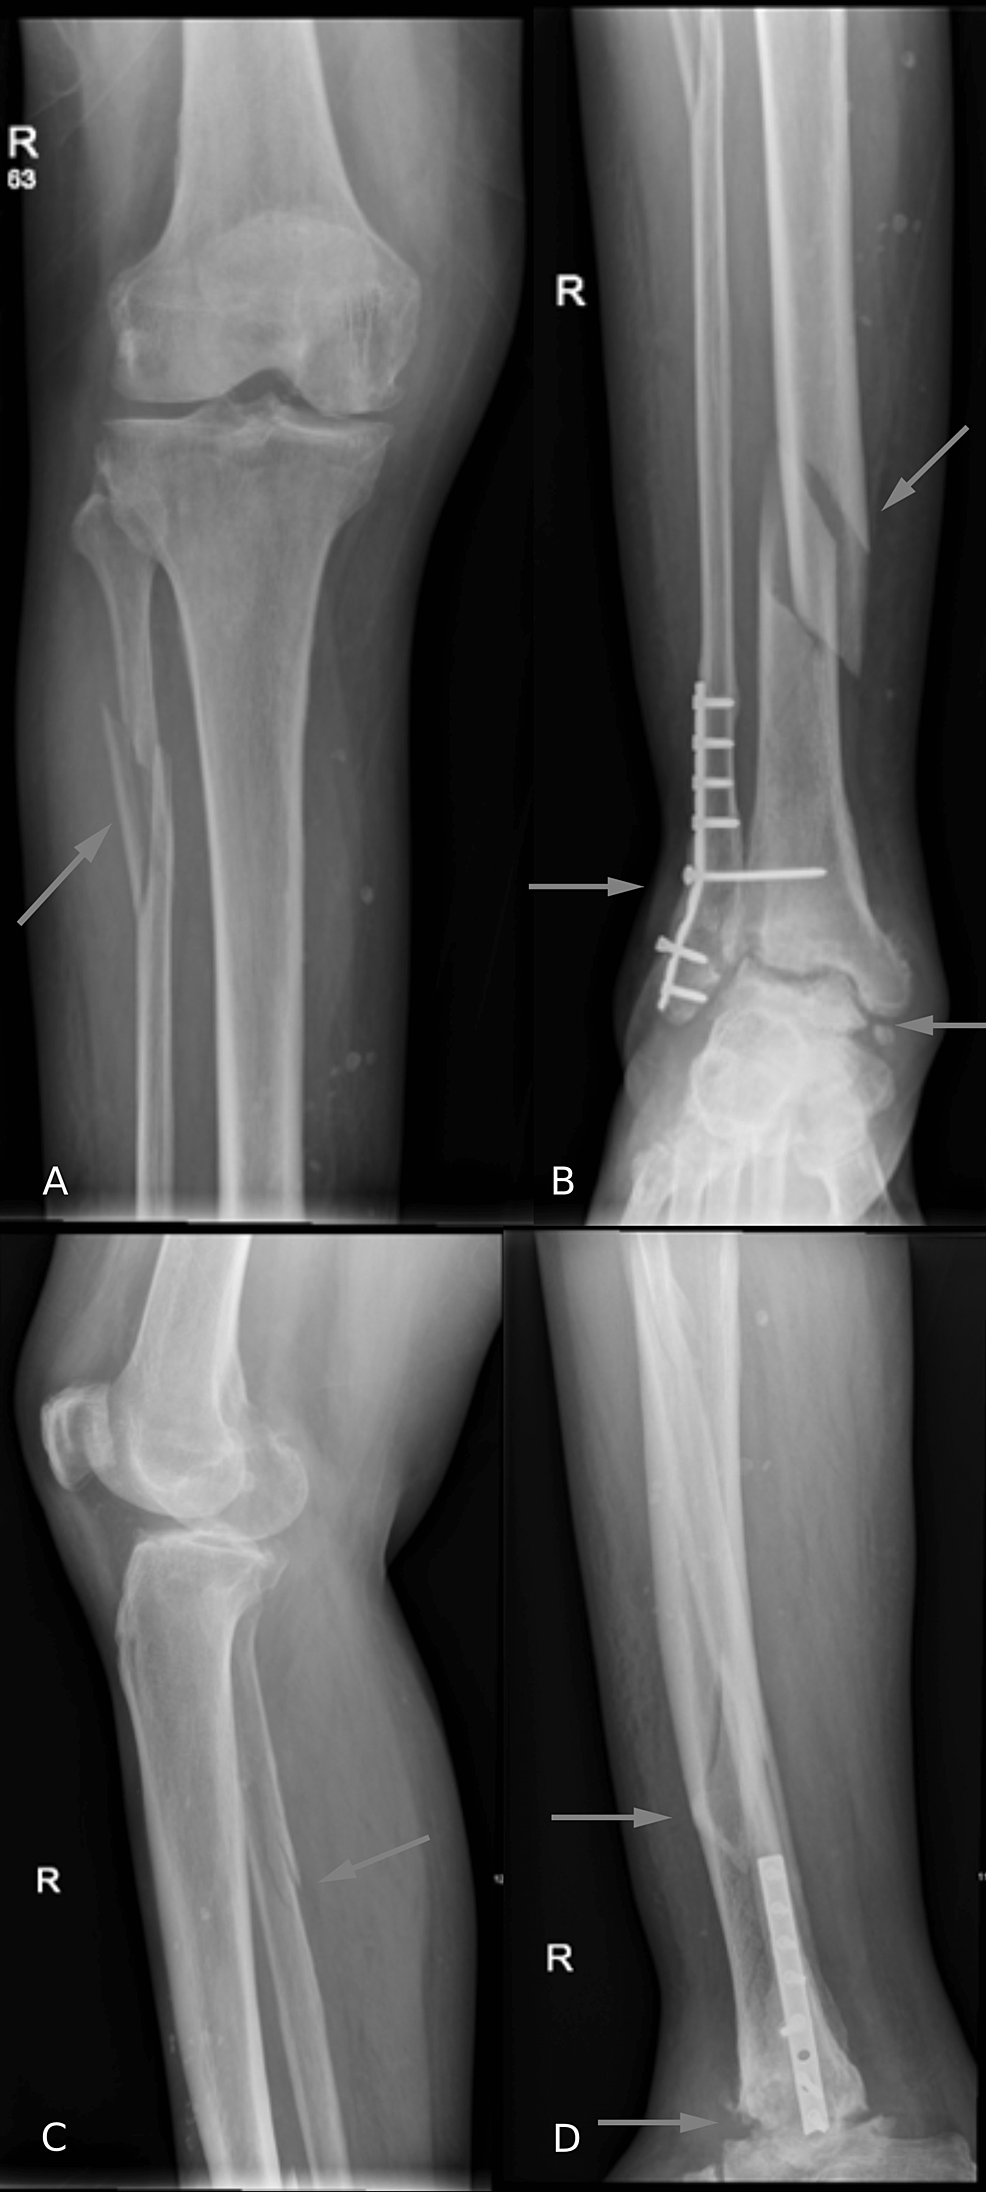 (A,-B)-Anteroposterior-and-(C,-D)-lateral-X-rays-of-the-right-tibia-and-fibula-after-the-injury-